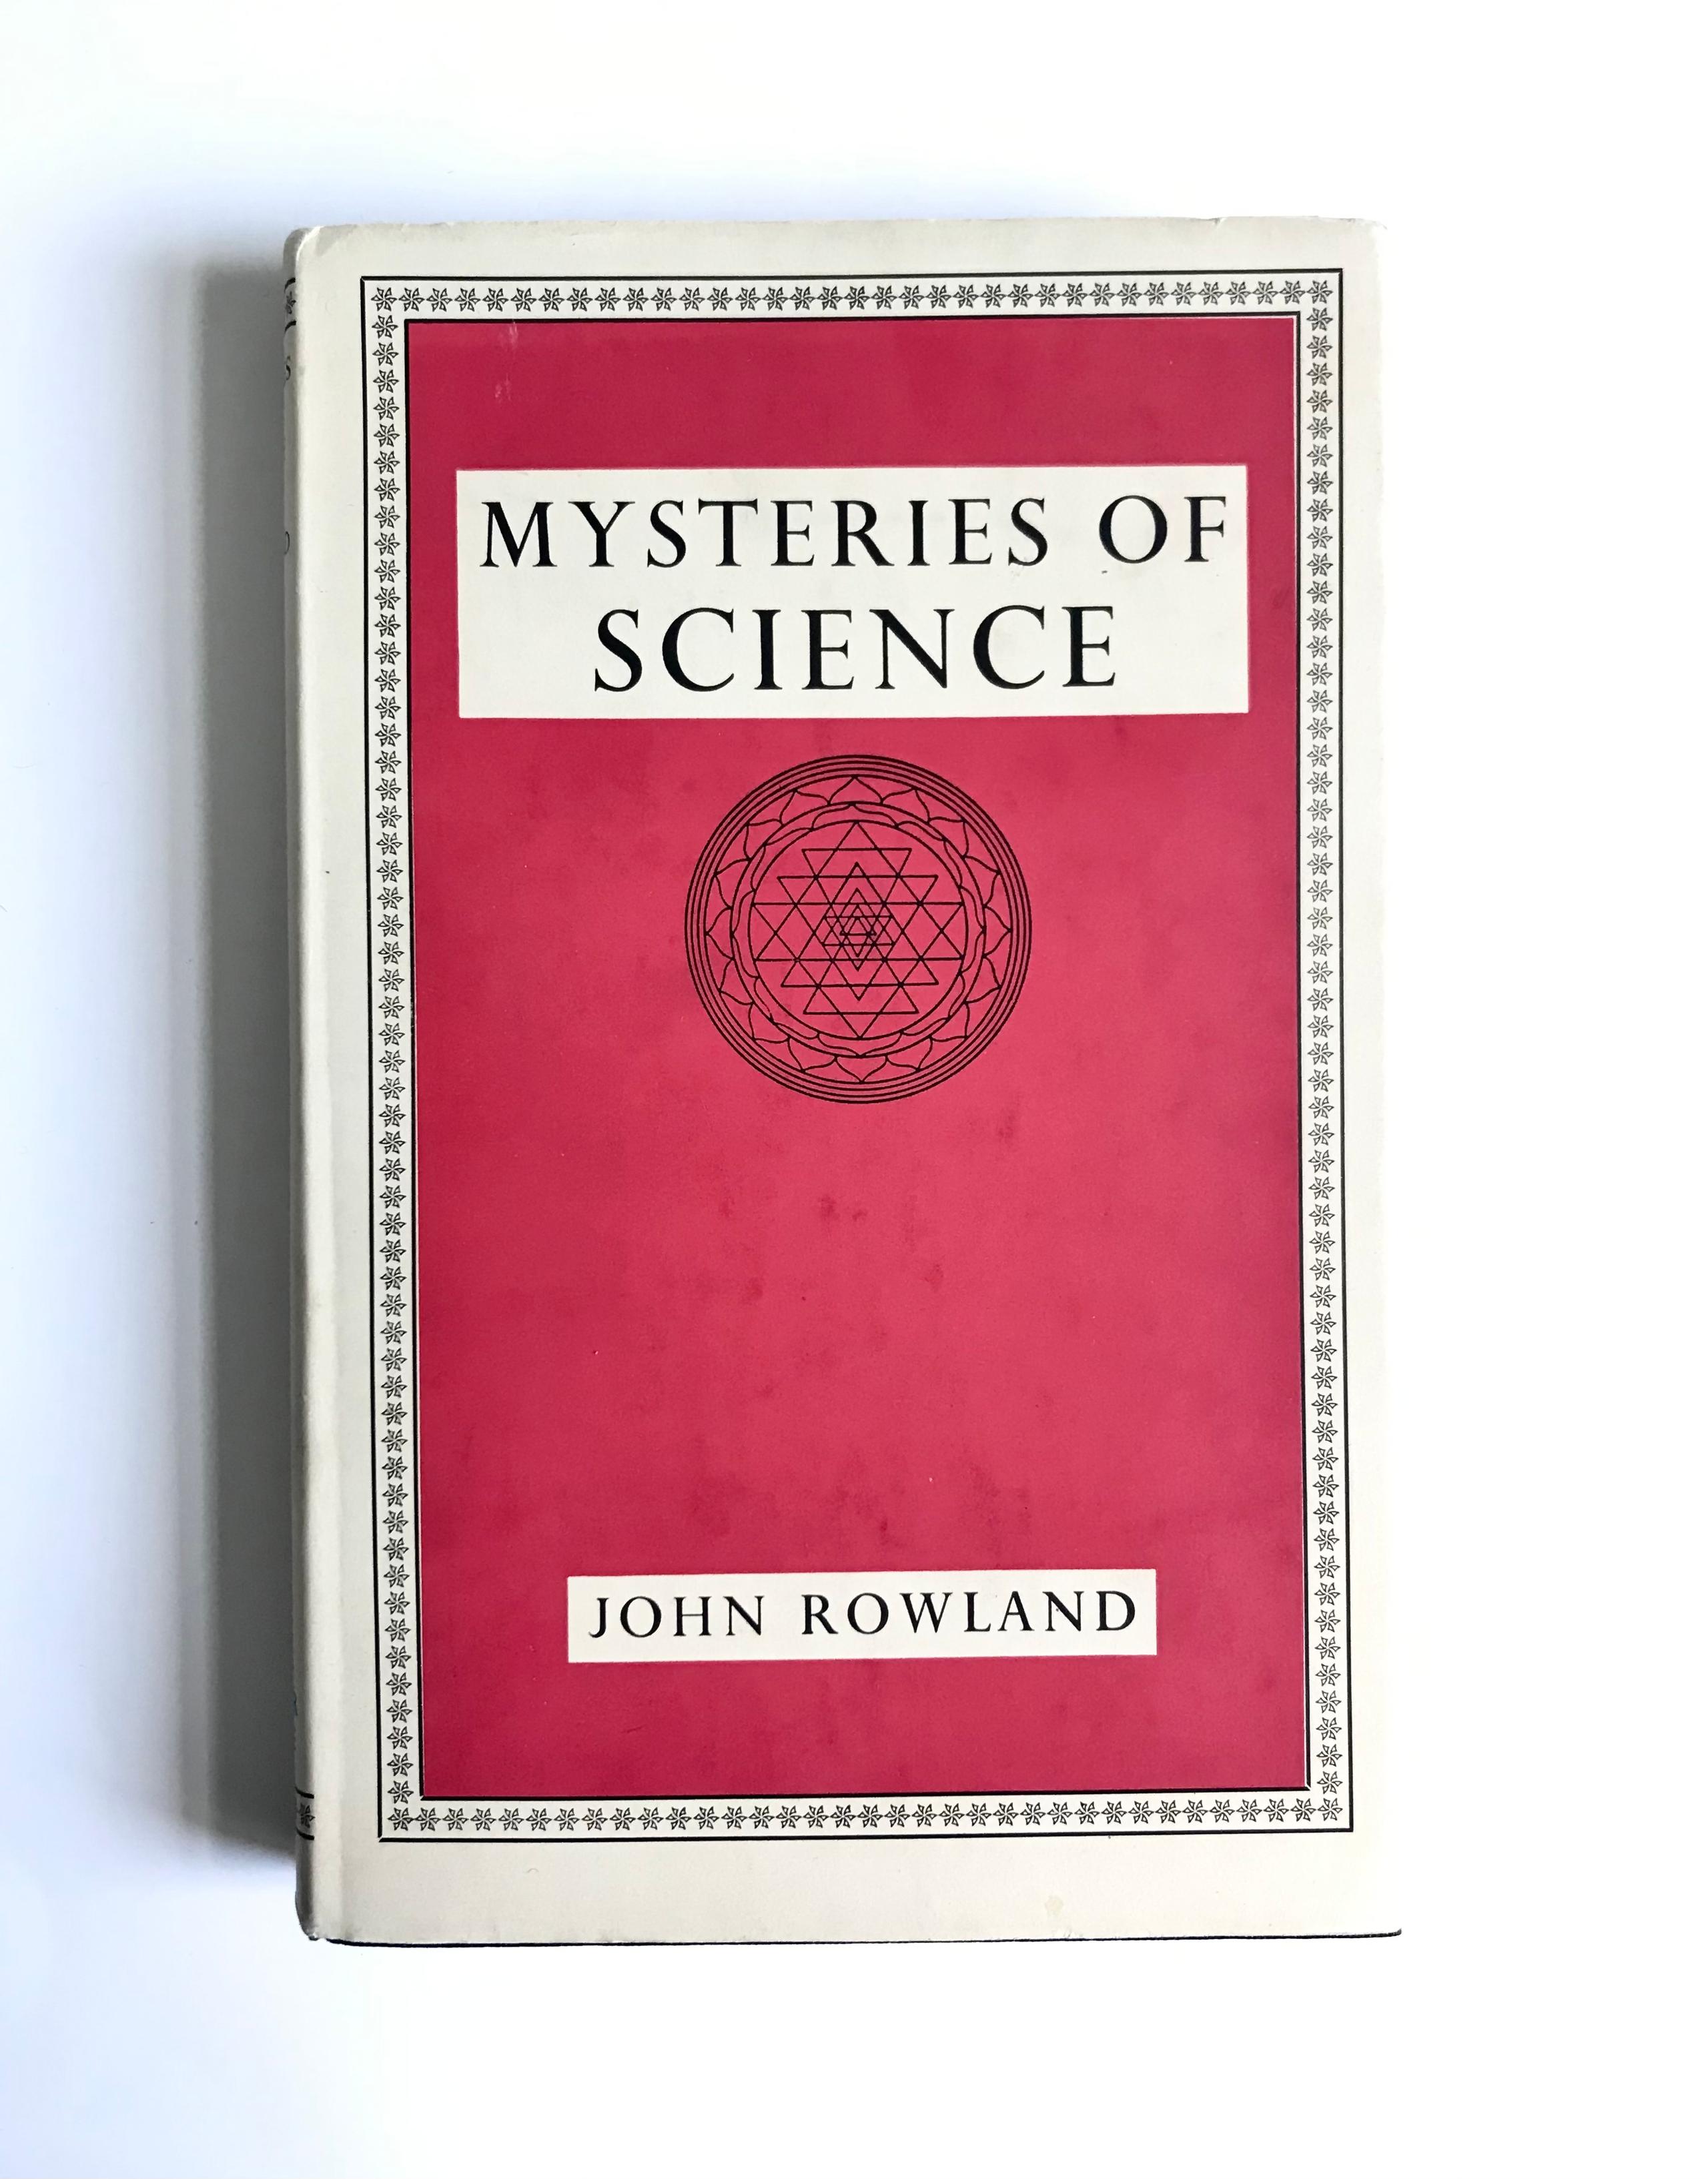 Mysteries of Science by John Rowland